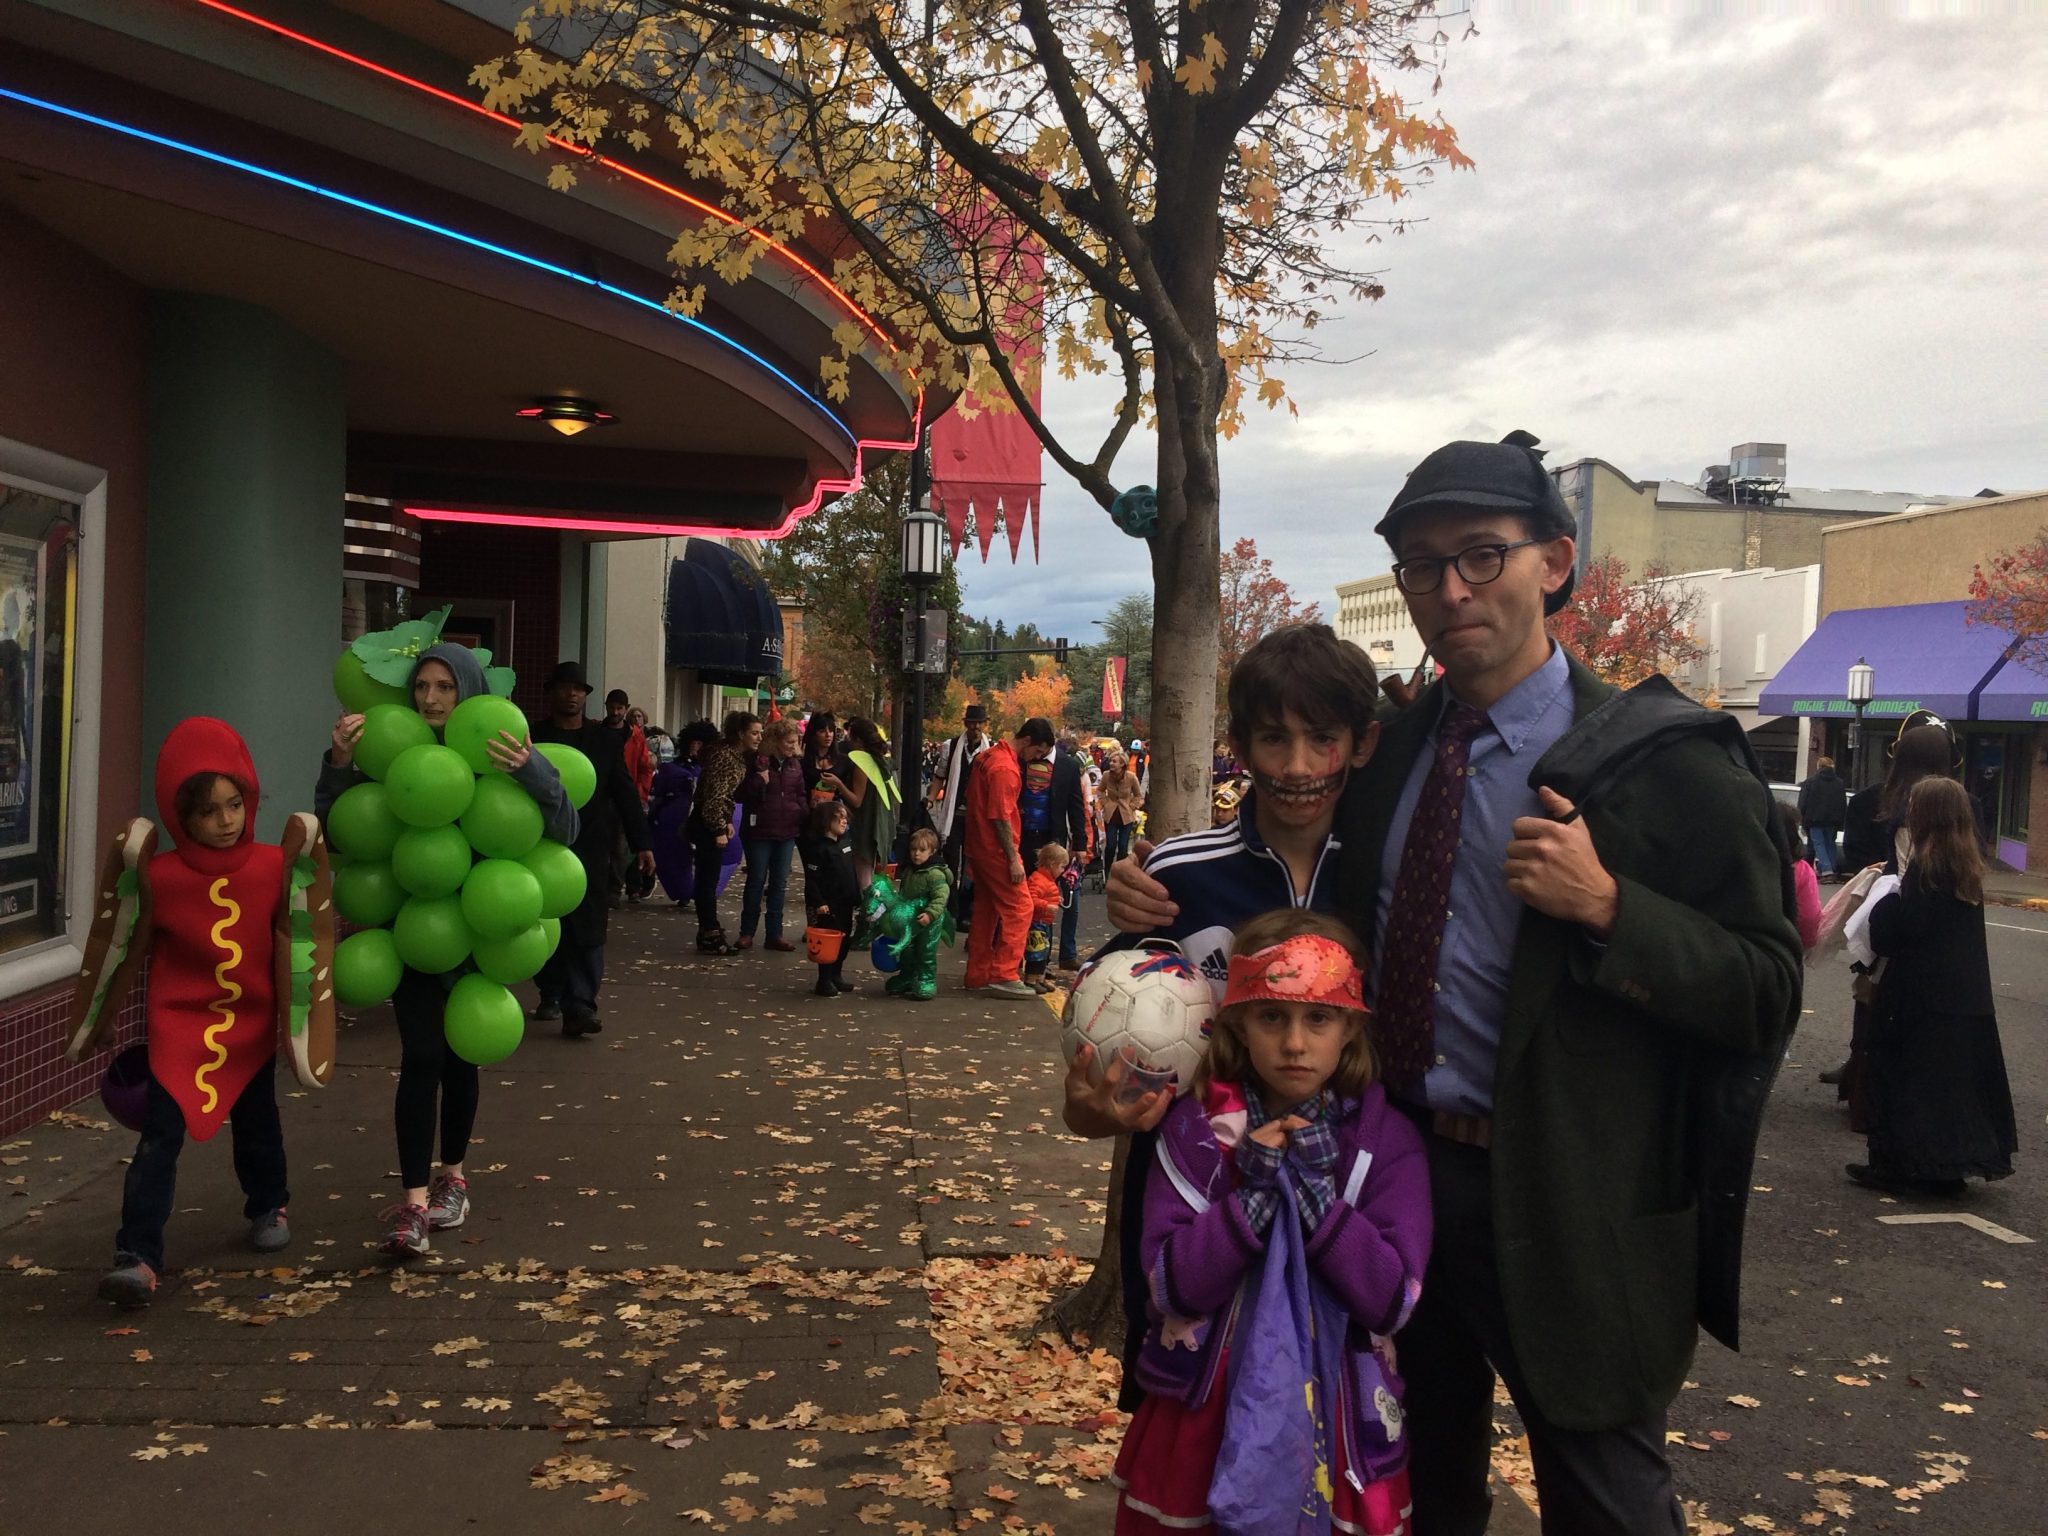 Mr. Sherlock Holmes accompanied by a zombie soccer player and a princess outside the Varsity Theater on Halloween in Ashland, Oregon